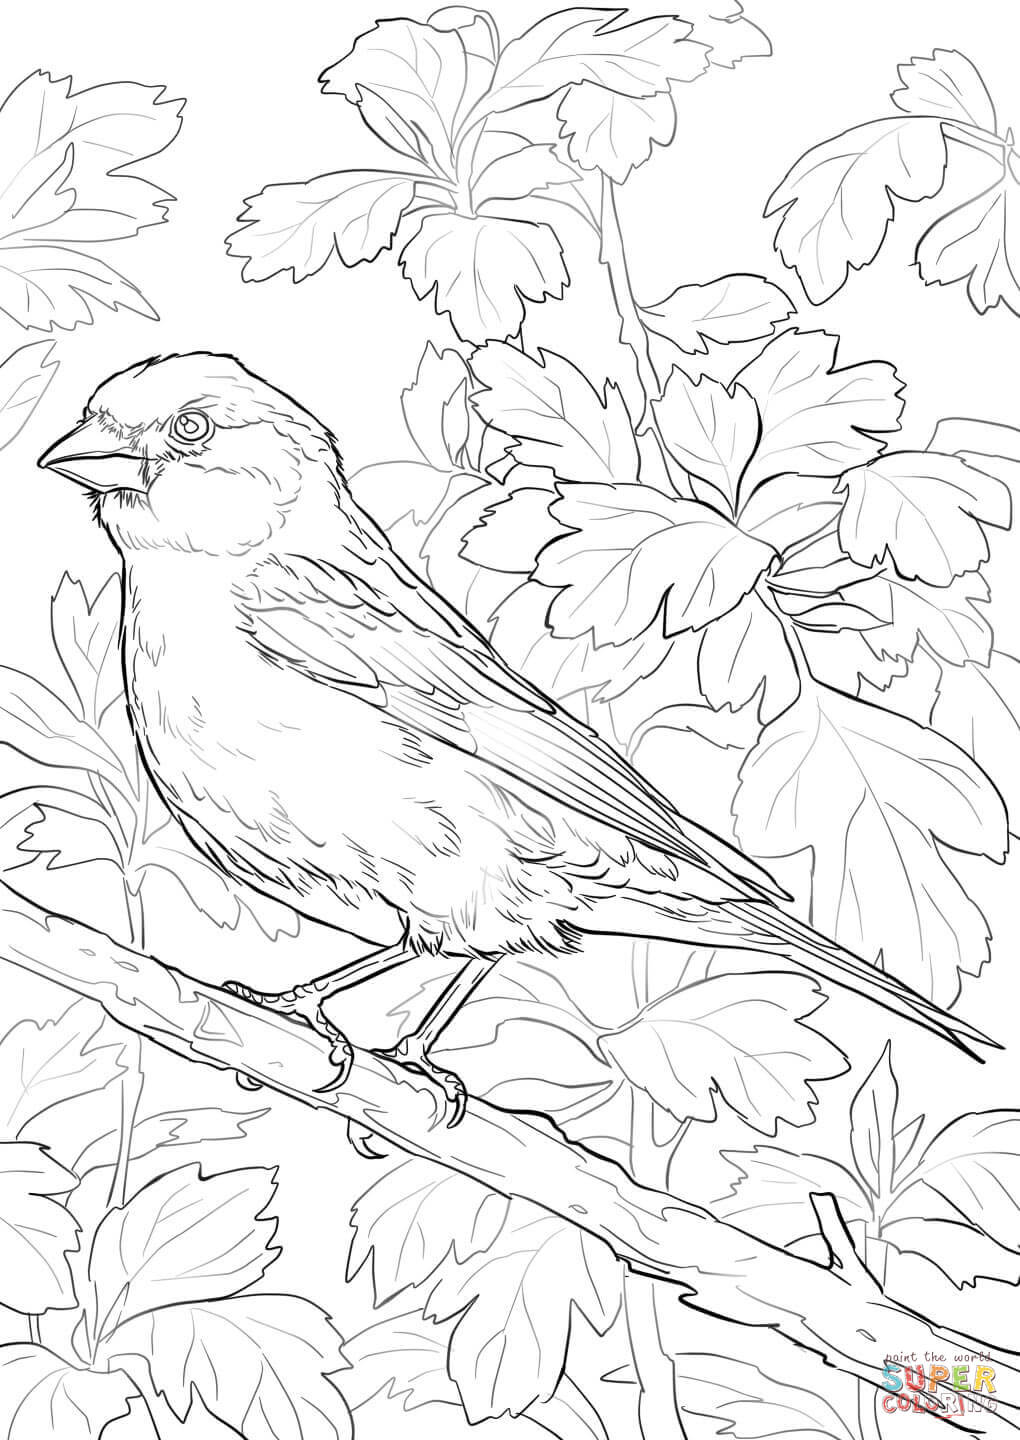 Purple finch coloring page free printable coloring pages